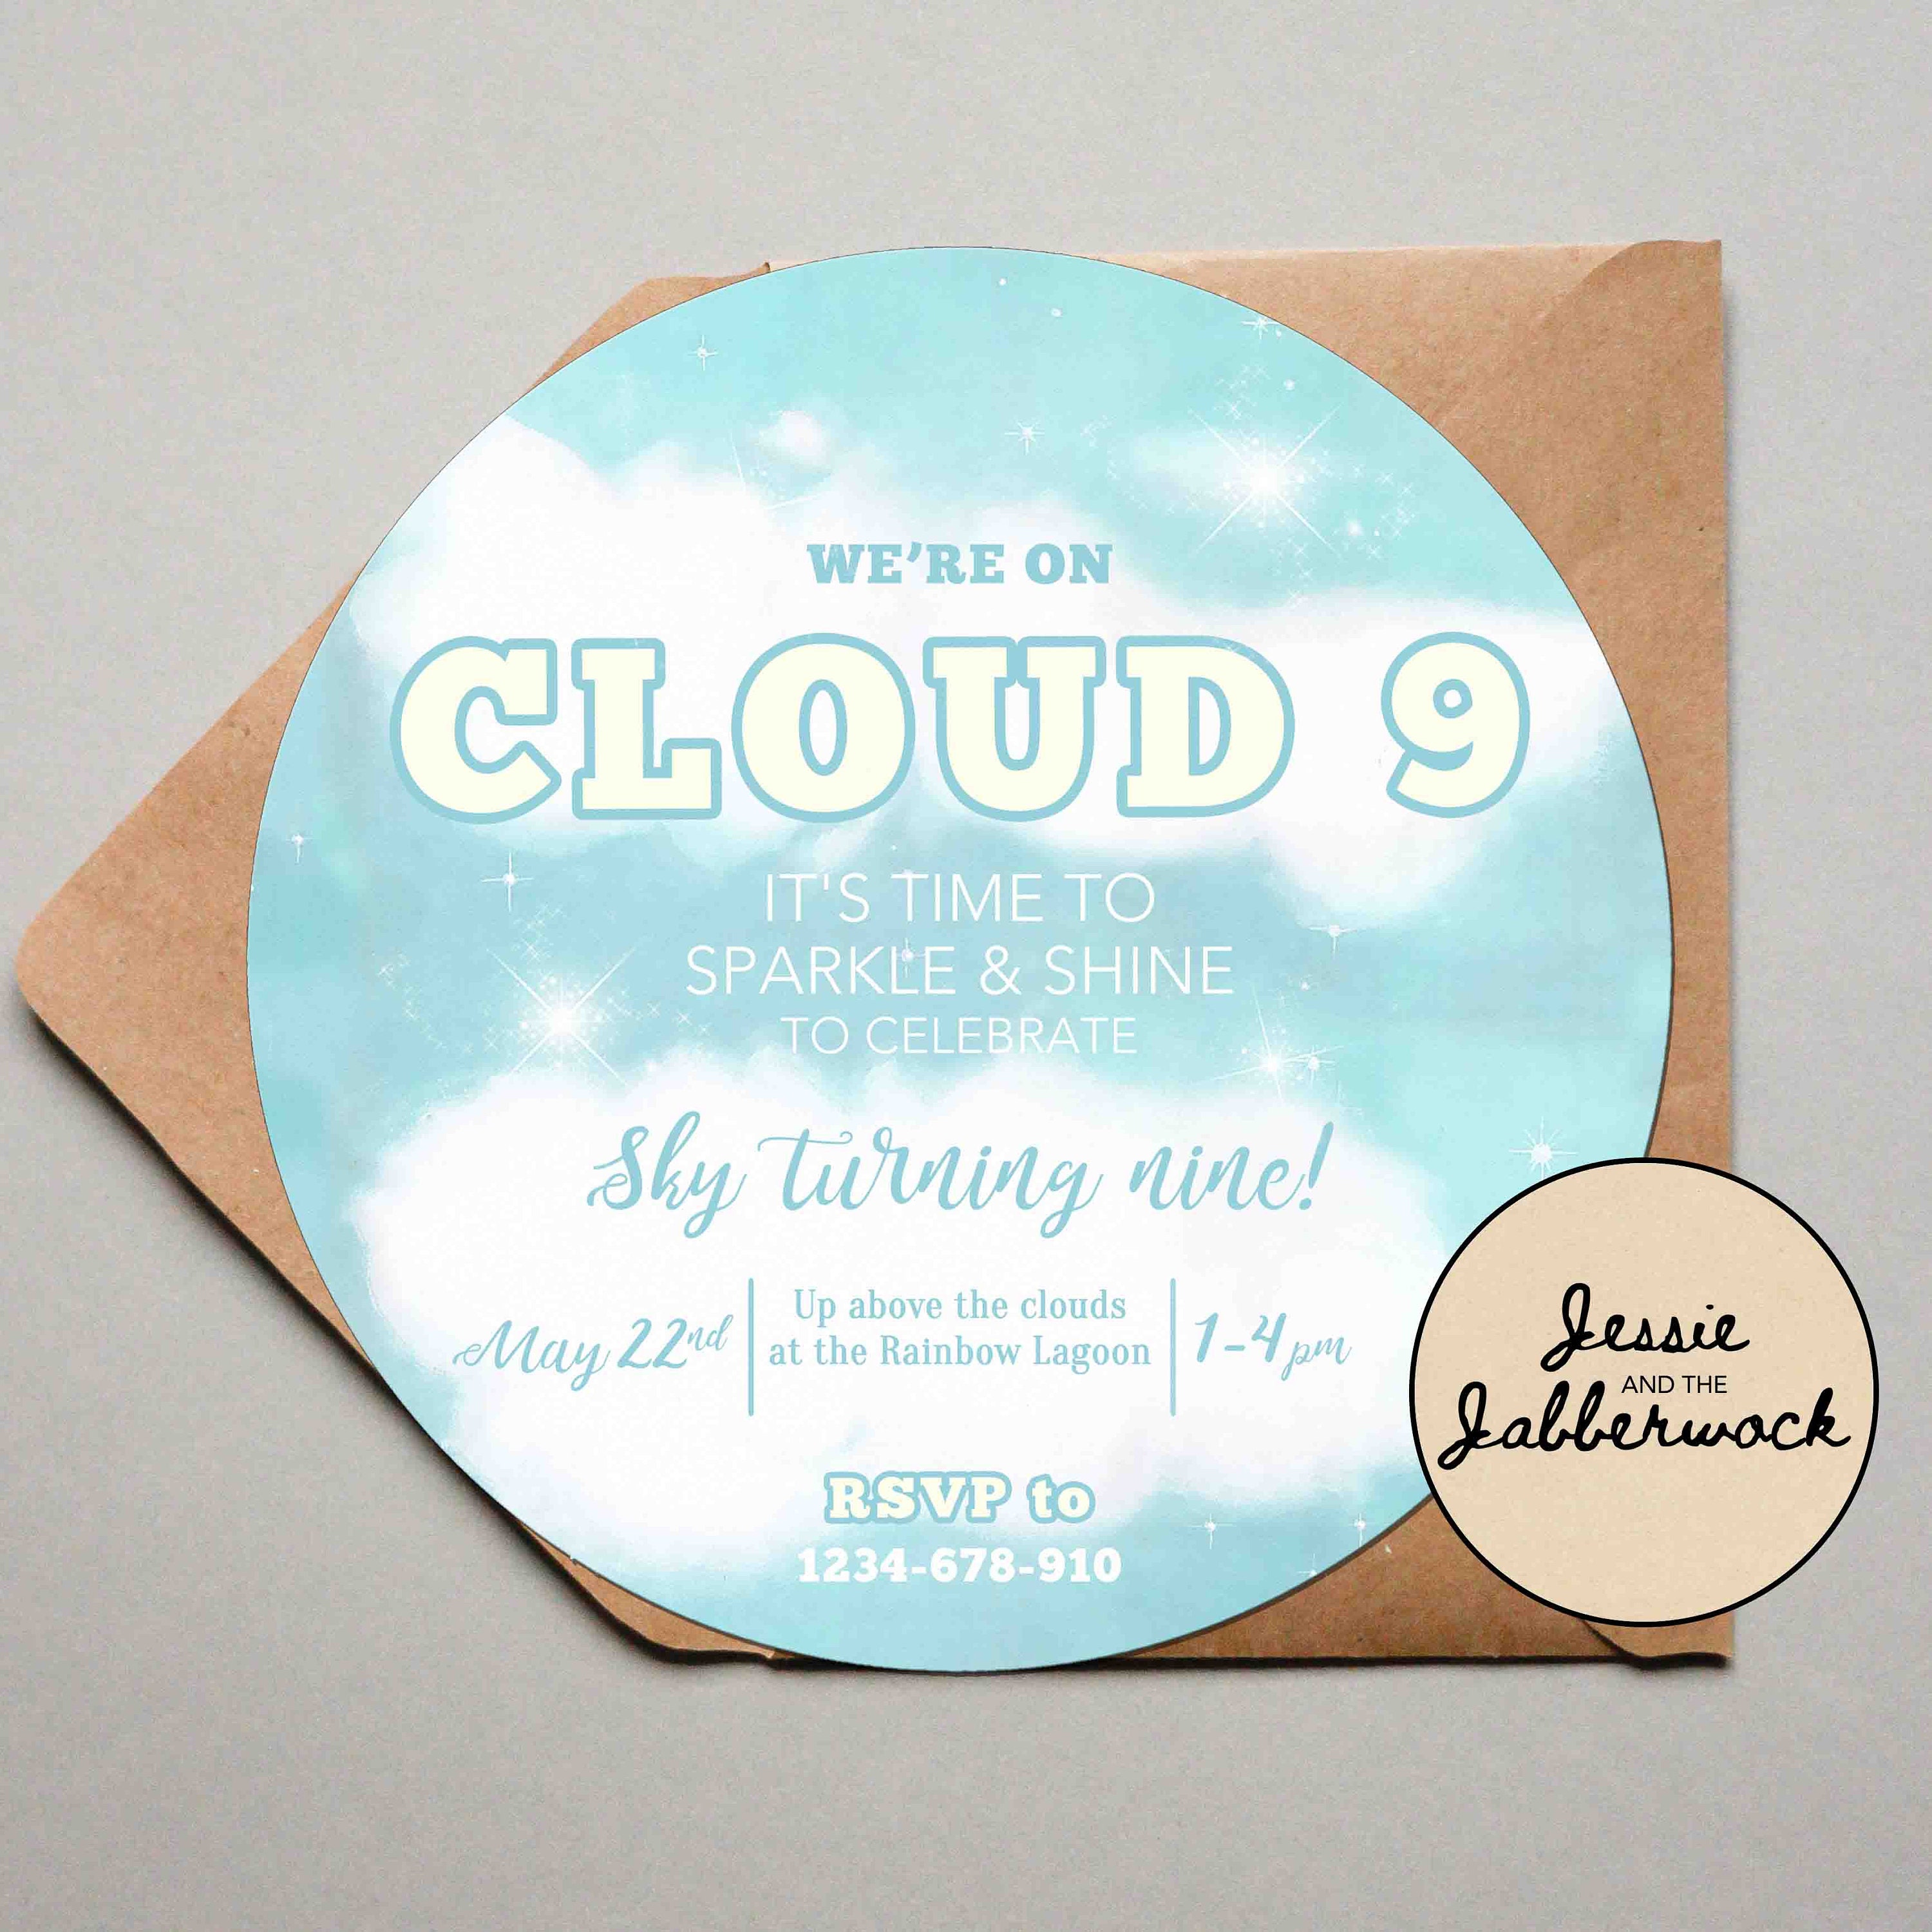 cloud-9-invitation-9th-birthday-invite-clouds-candy-floss-etsy